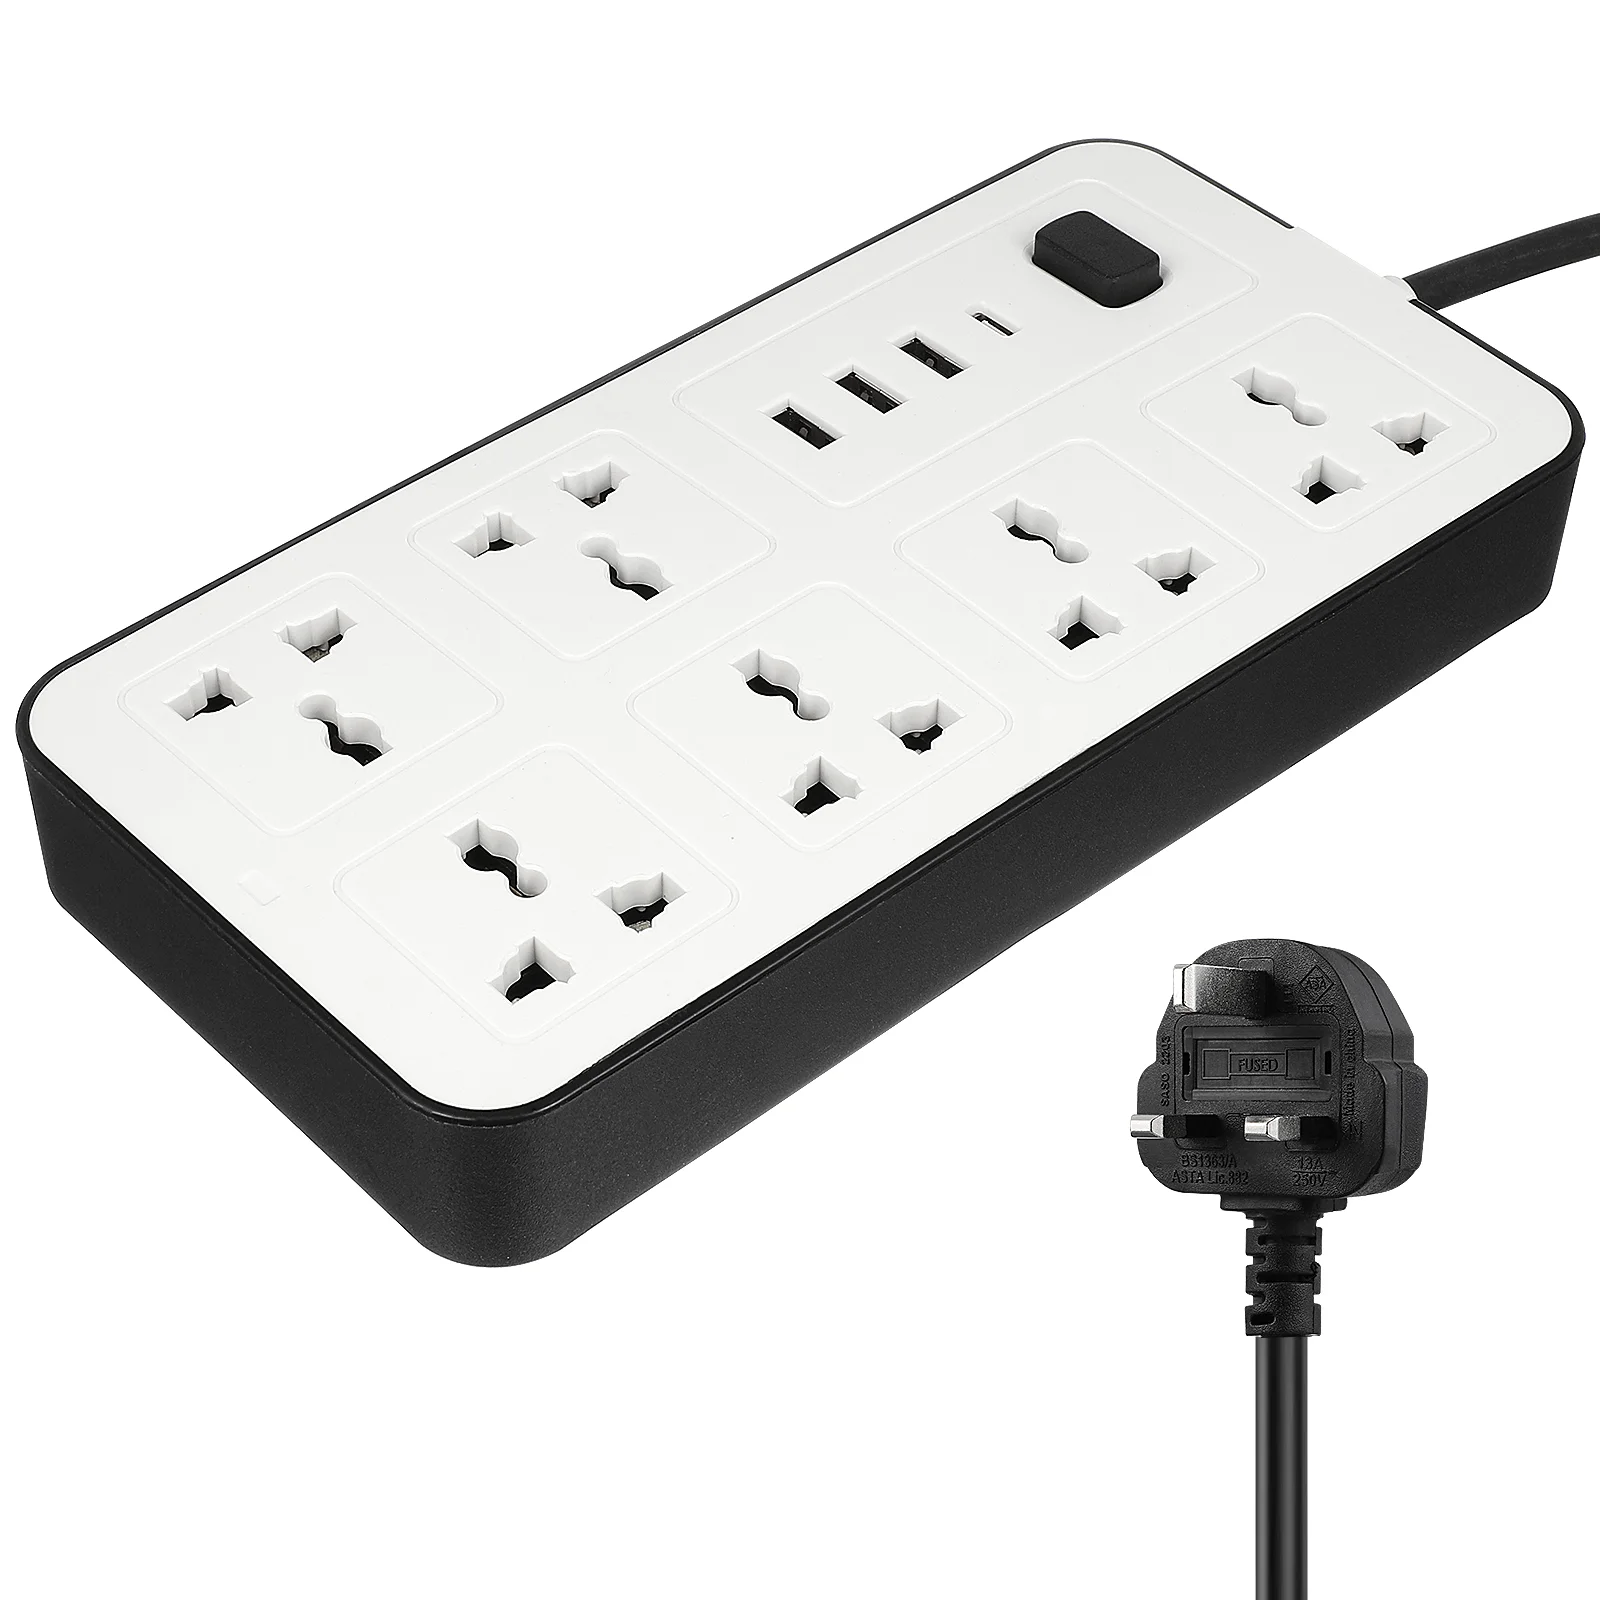 Flat Power Strip Extension Cable Multi Plug Outlet With USB Charging Ports UK Plug British Standard Panel Wiring Socket